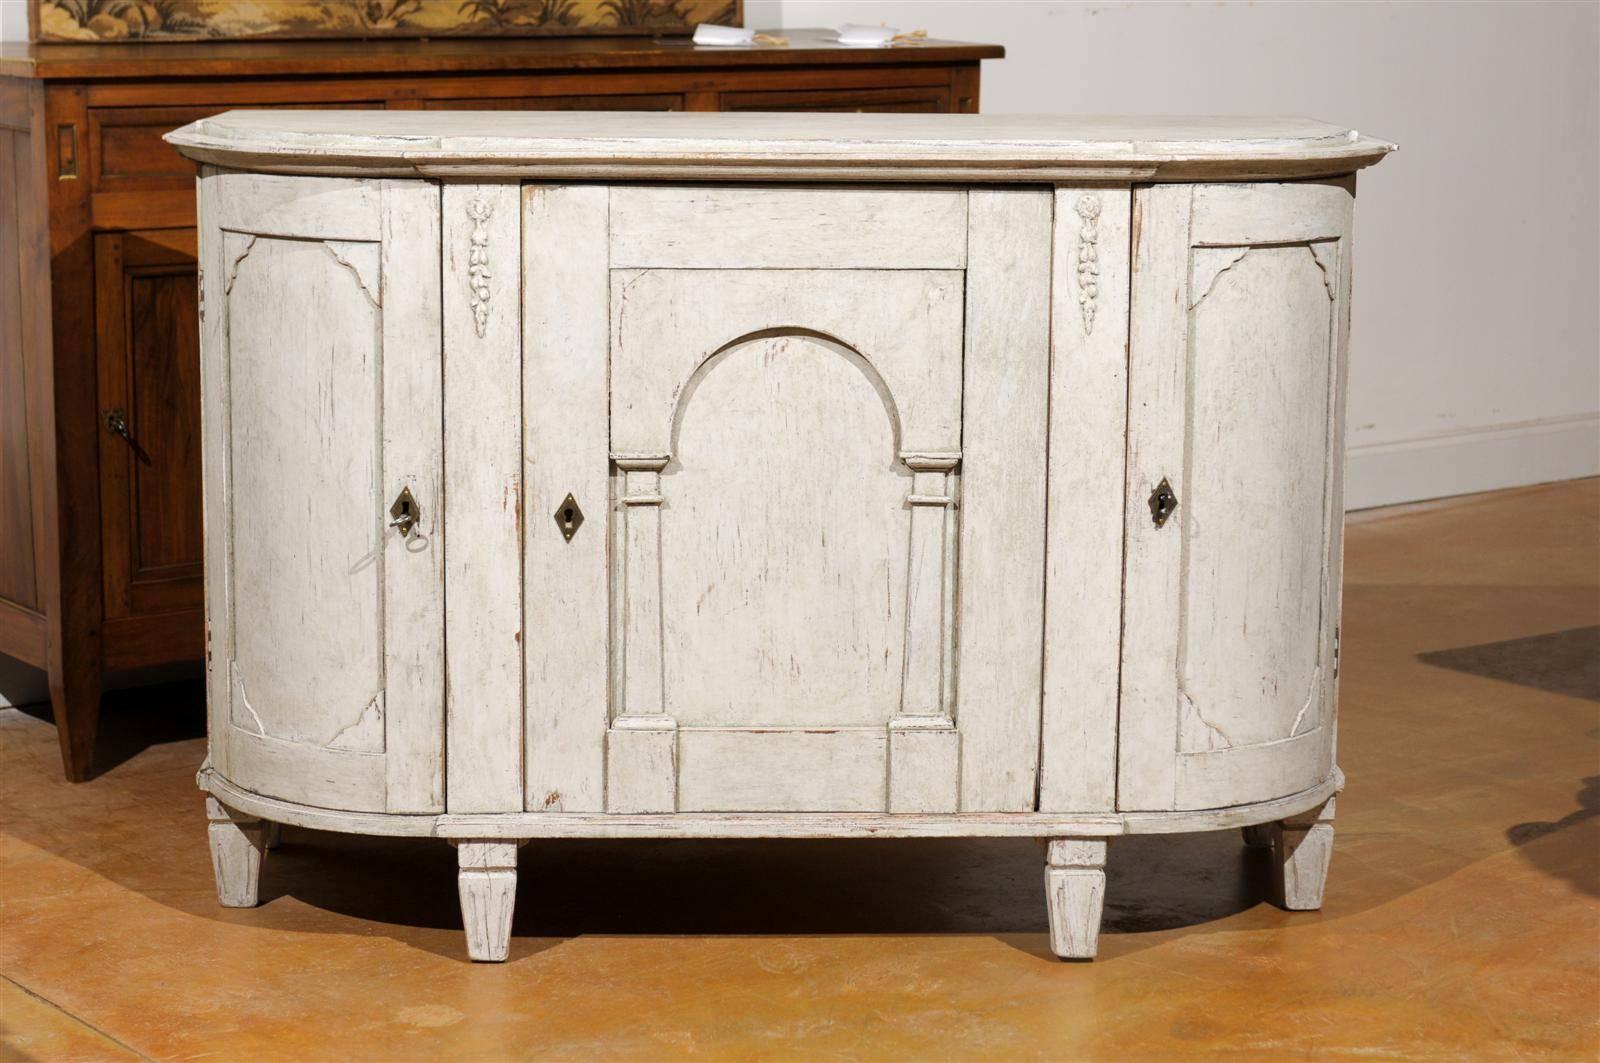 Swedish 19th century demilune painted sideboard with three doors, circa 1880.